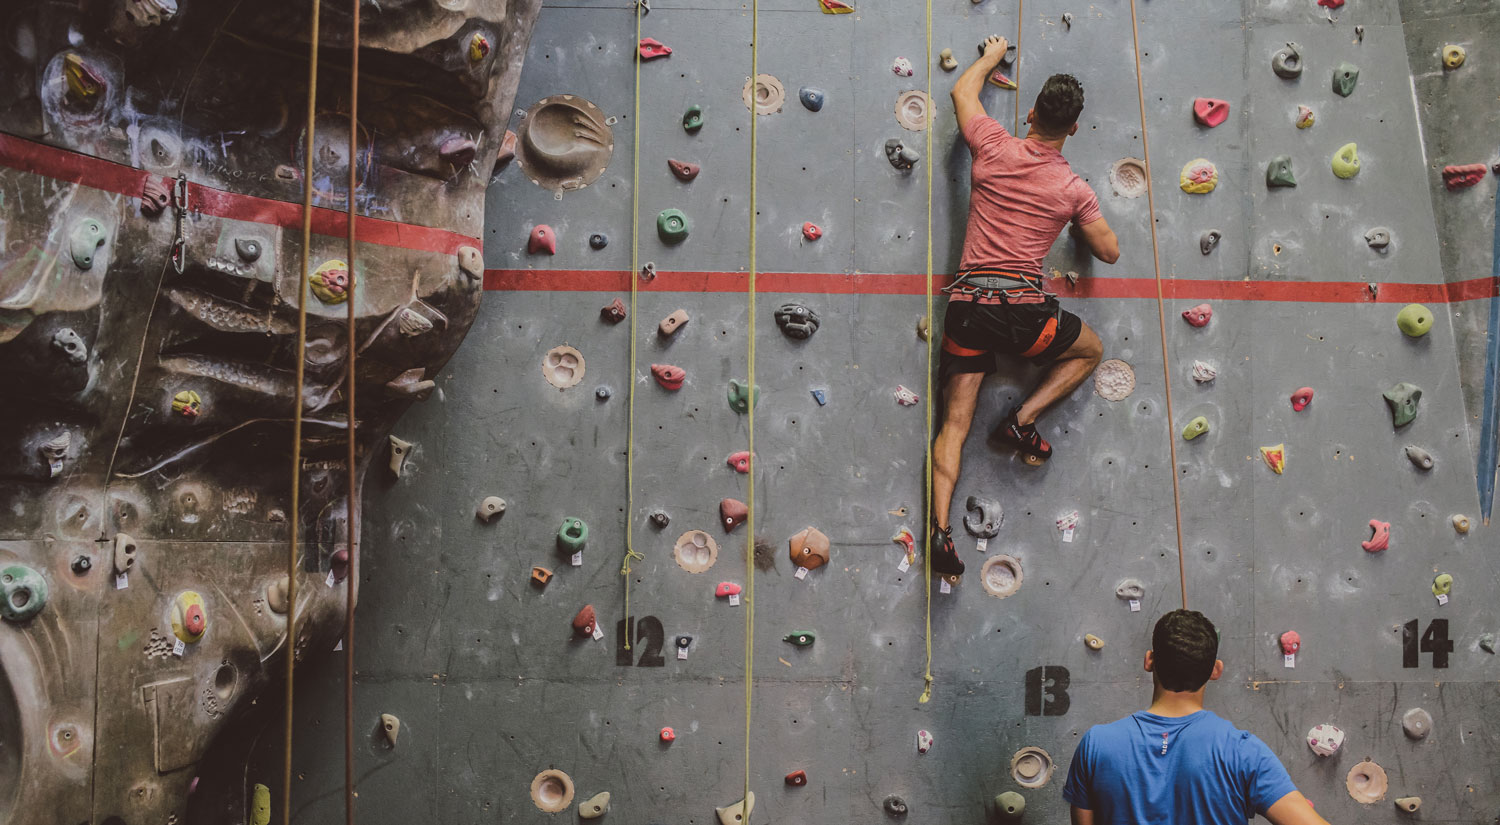 Two people climbing a climbing wall, one on the wall, the other guiding from below.